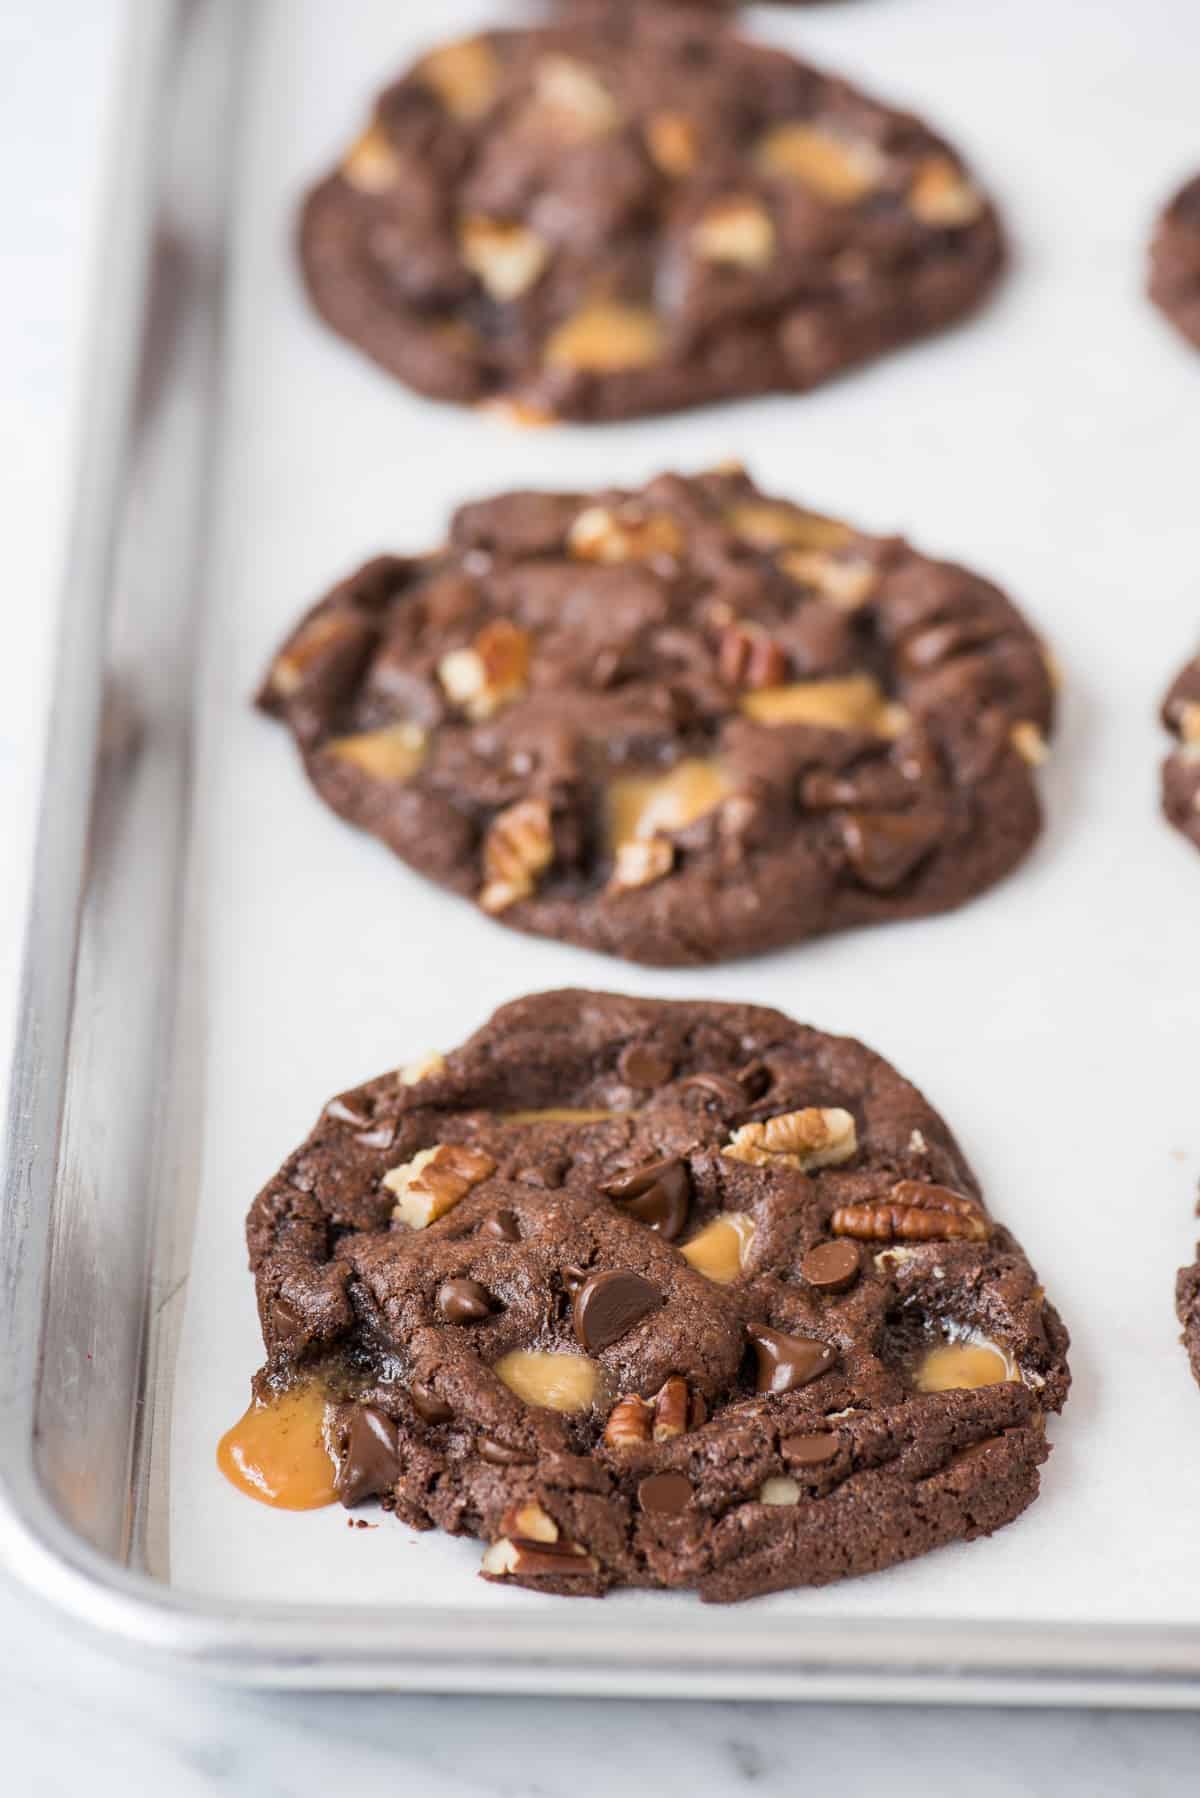 chocolate turtle cookies with caramel, pecans and chocolate chips on white parchment paper on metal baking sheet